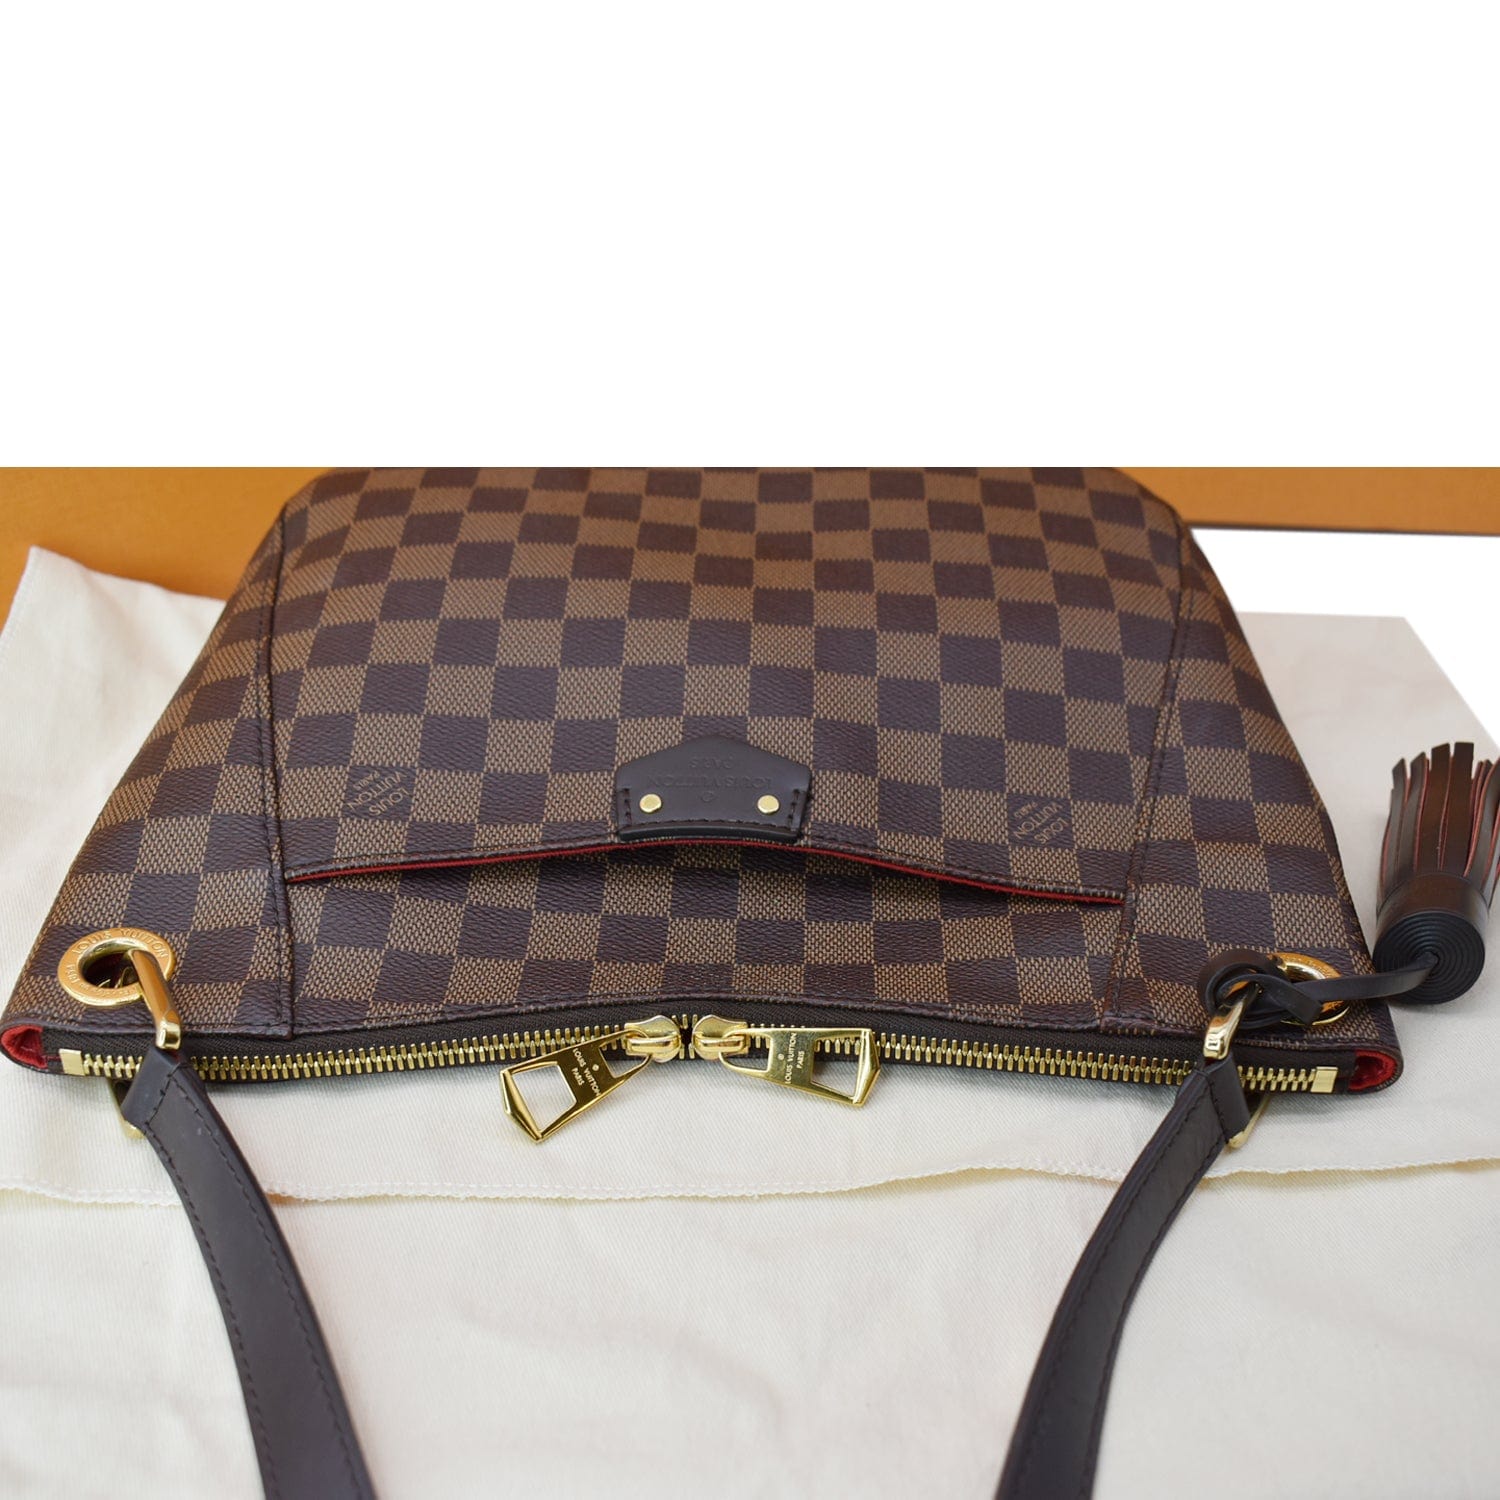 Damier Ebene South Bank Besace Crossbody Bag (Authentic Pre-Owned) – The  Lady Bag